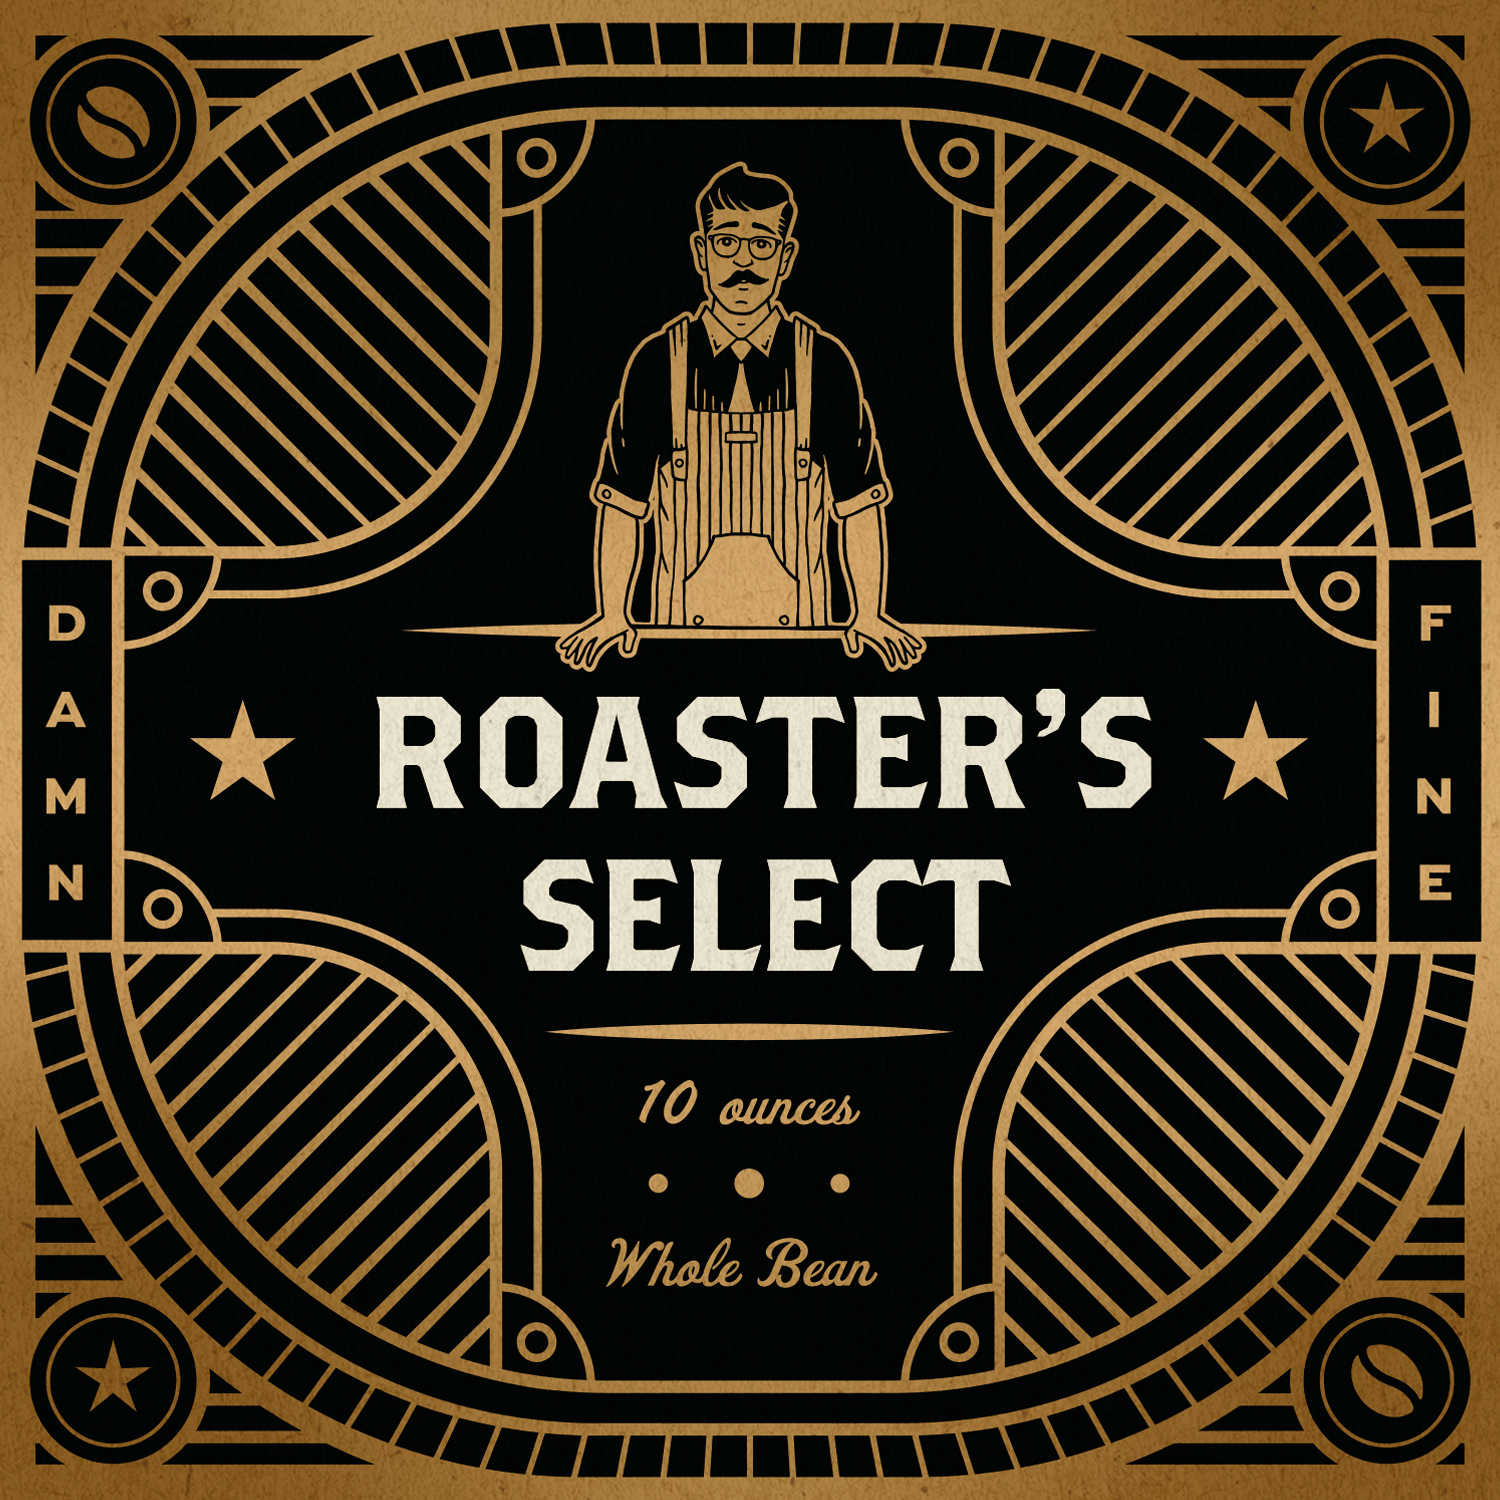 Roaster's Select - One Bag